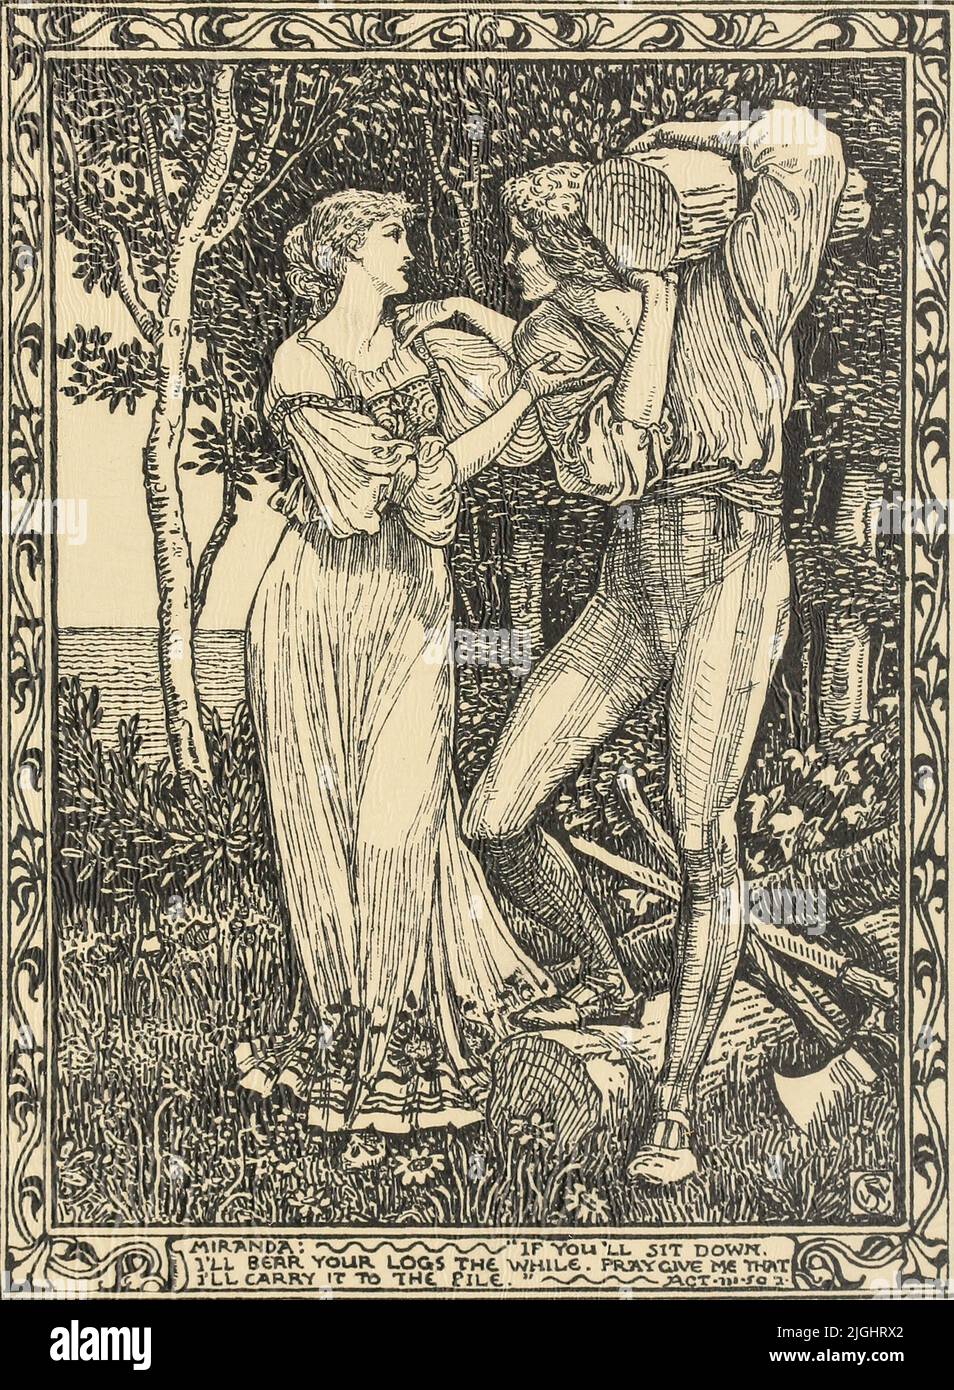 Miranda - If you'll sit down I'll bear your logs the while. Pray give me that, I'll carry it to the pile [Act 3 Scene I] Illustrations to Shakespeare's Tempest by Walter Crane, 1845-1915; Engraved by Duncan C Dallas, Publication date 1894 Publisher London : J. M. Dent ; Boston : Copeland & Day Stock Photo